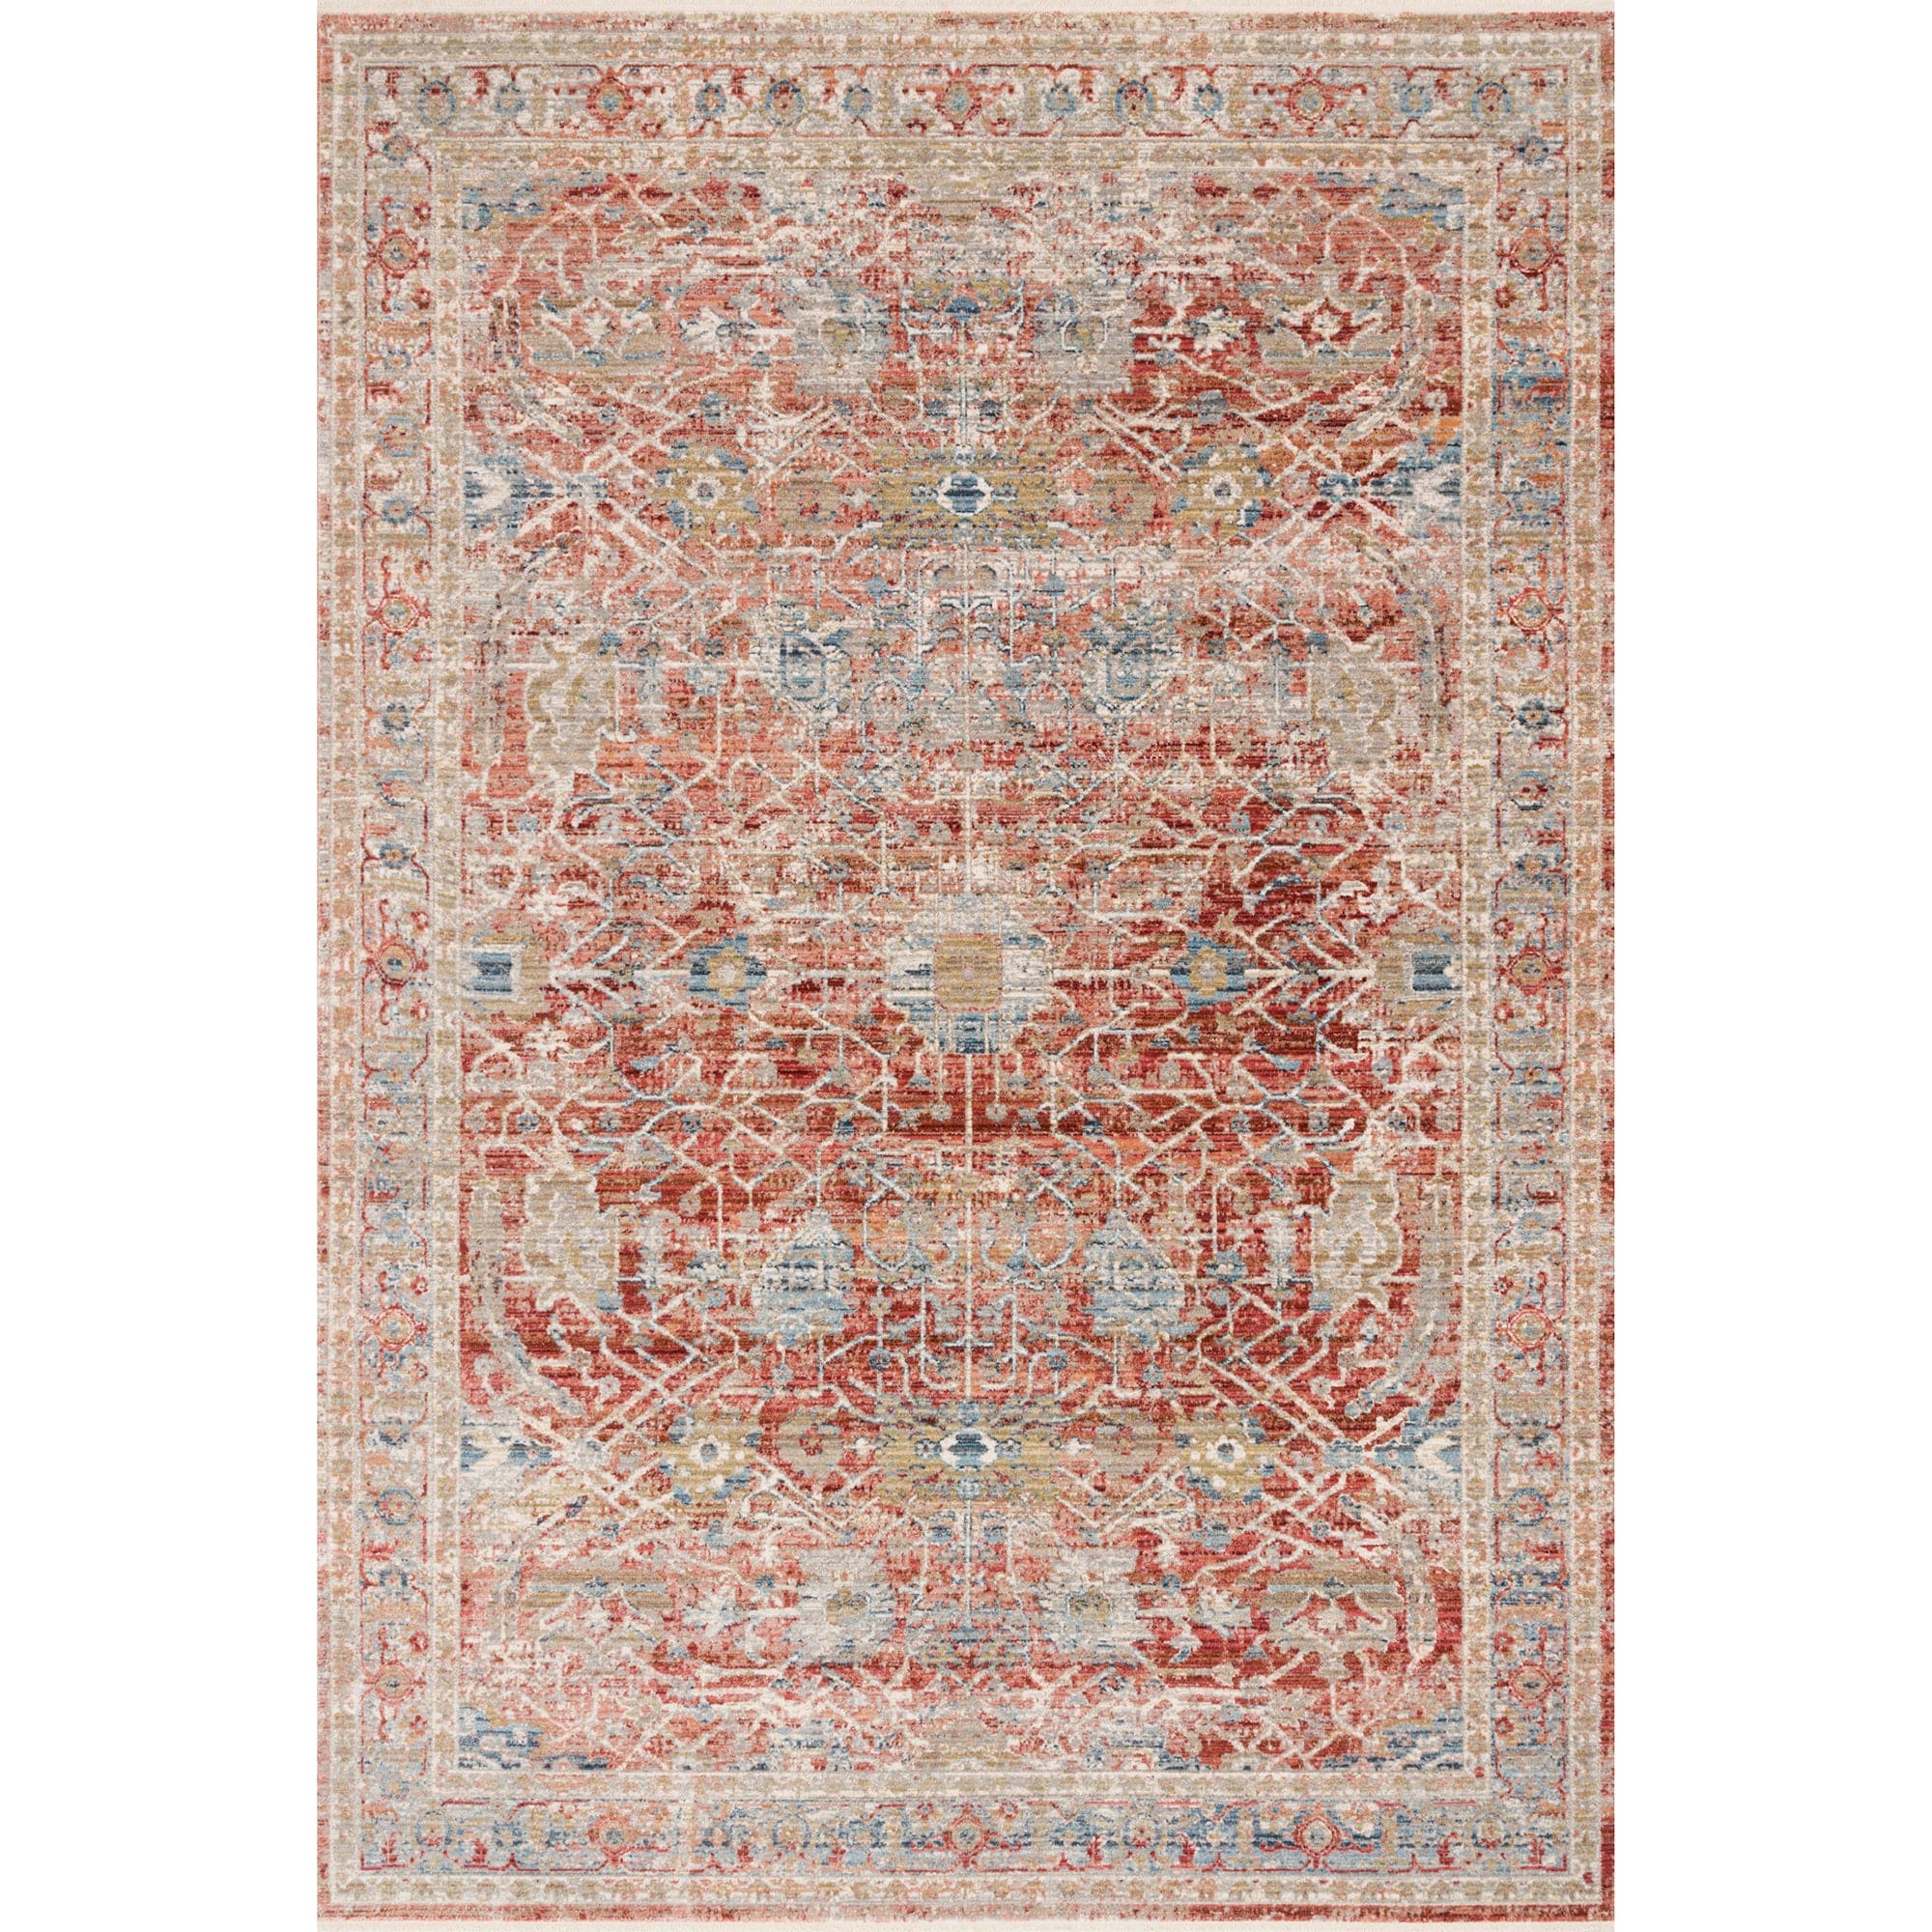 Loloi Majestic MM-04 Red / Ivory Area Rug - 2'0 x 3'0